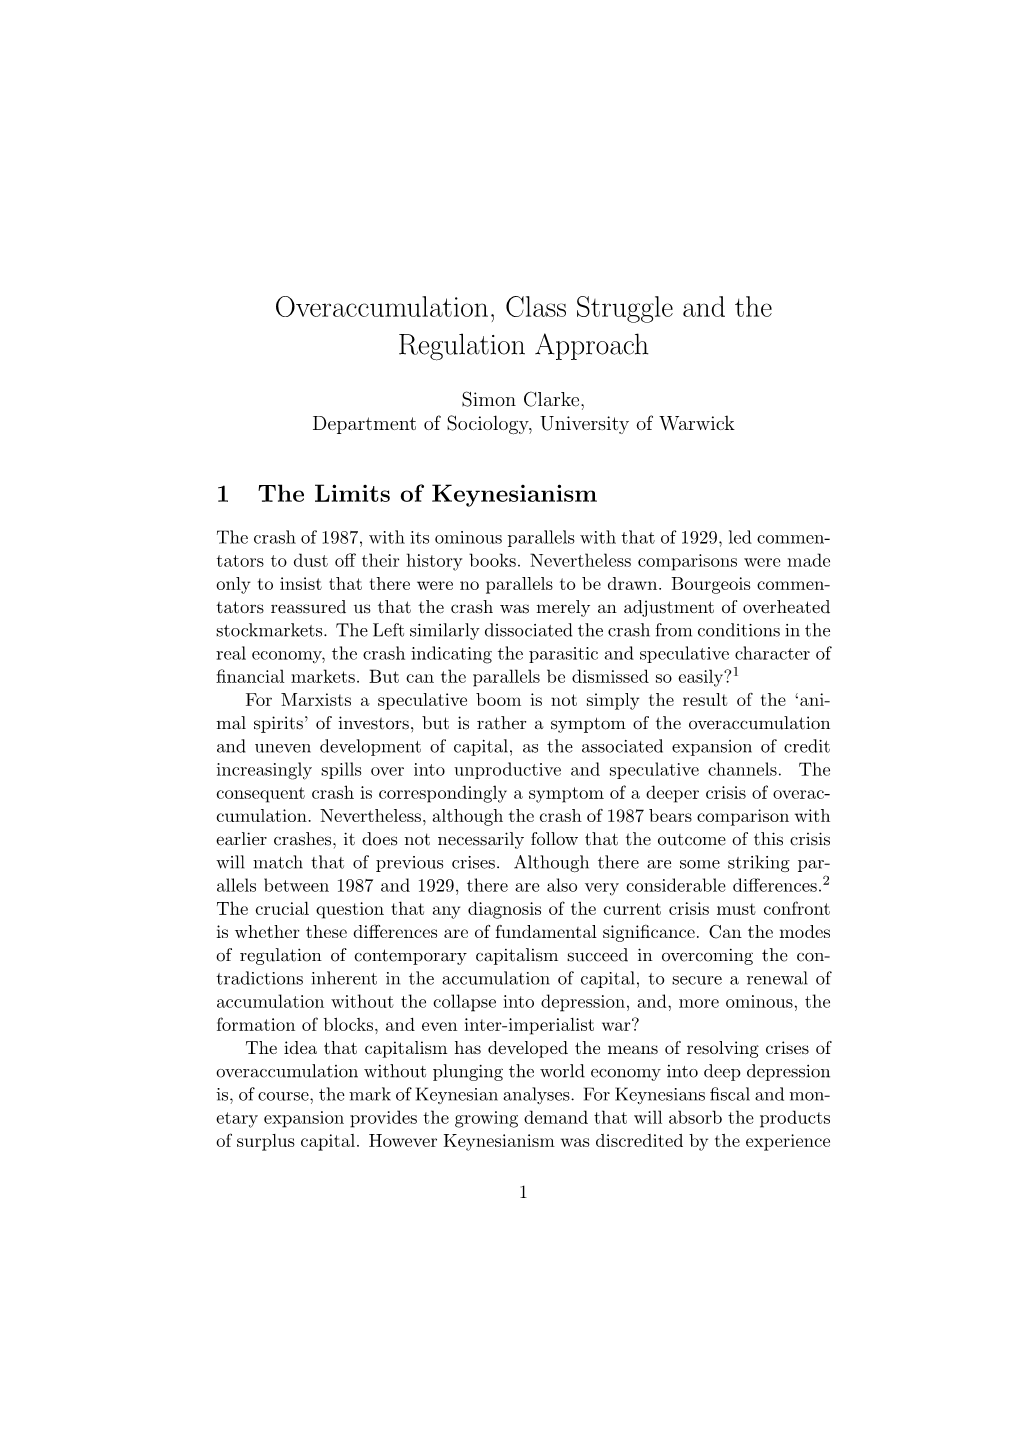 Overaccumulation, Class Struggle and the Regulation Approach